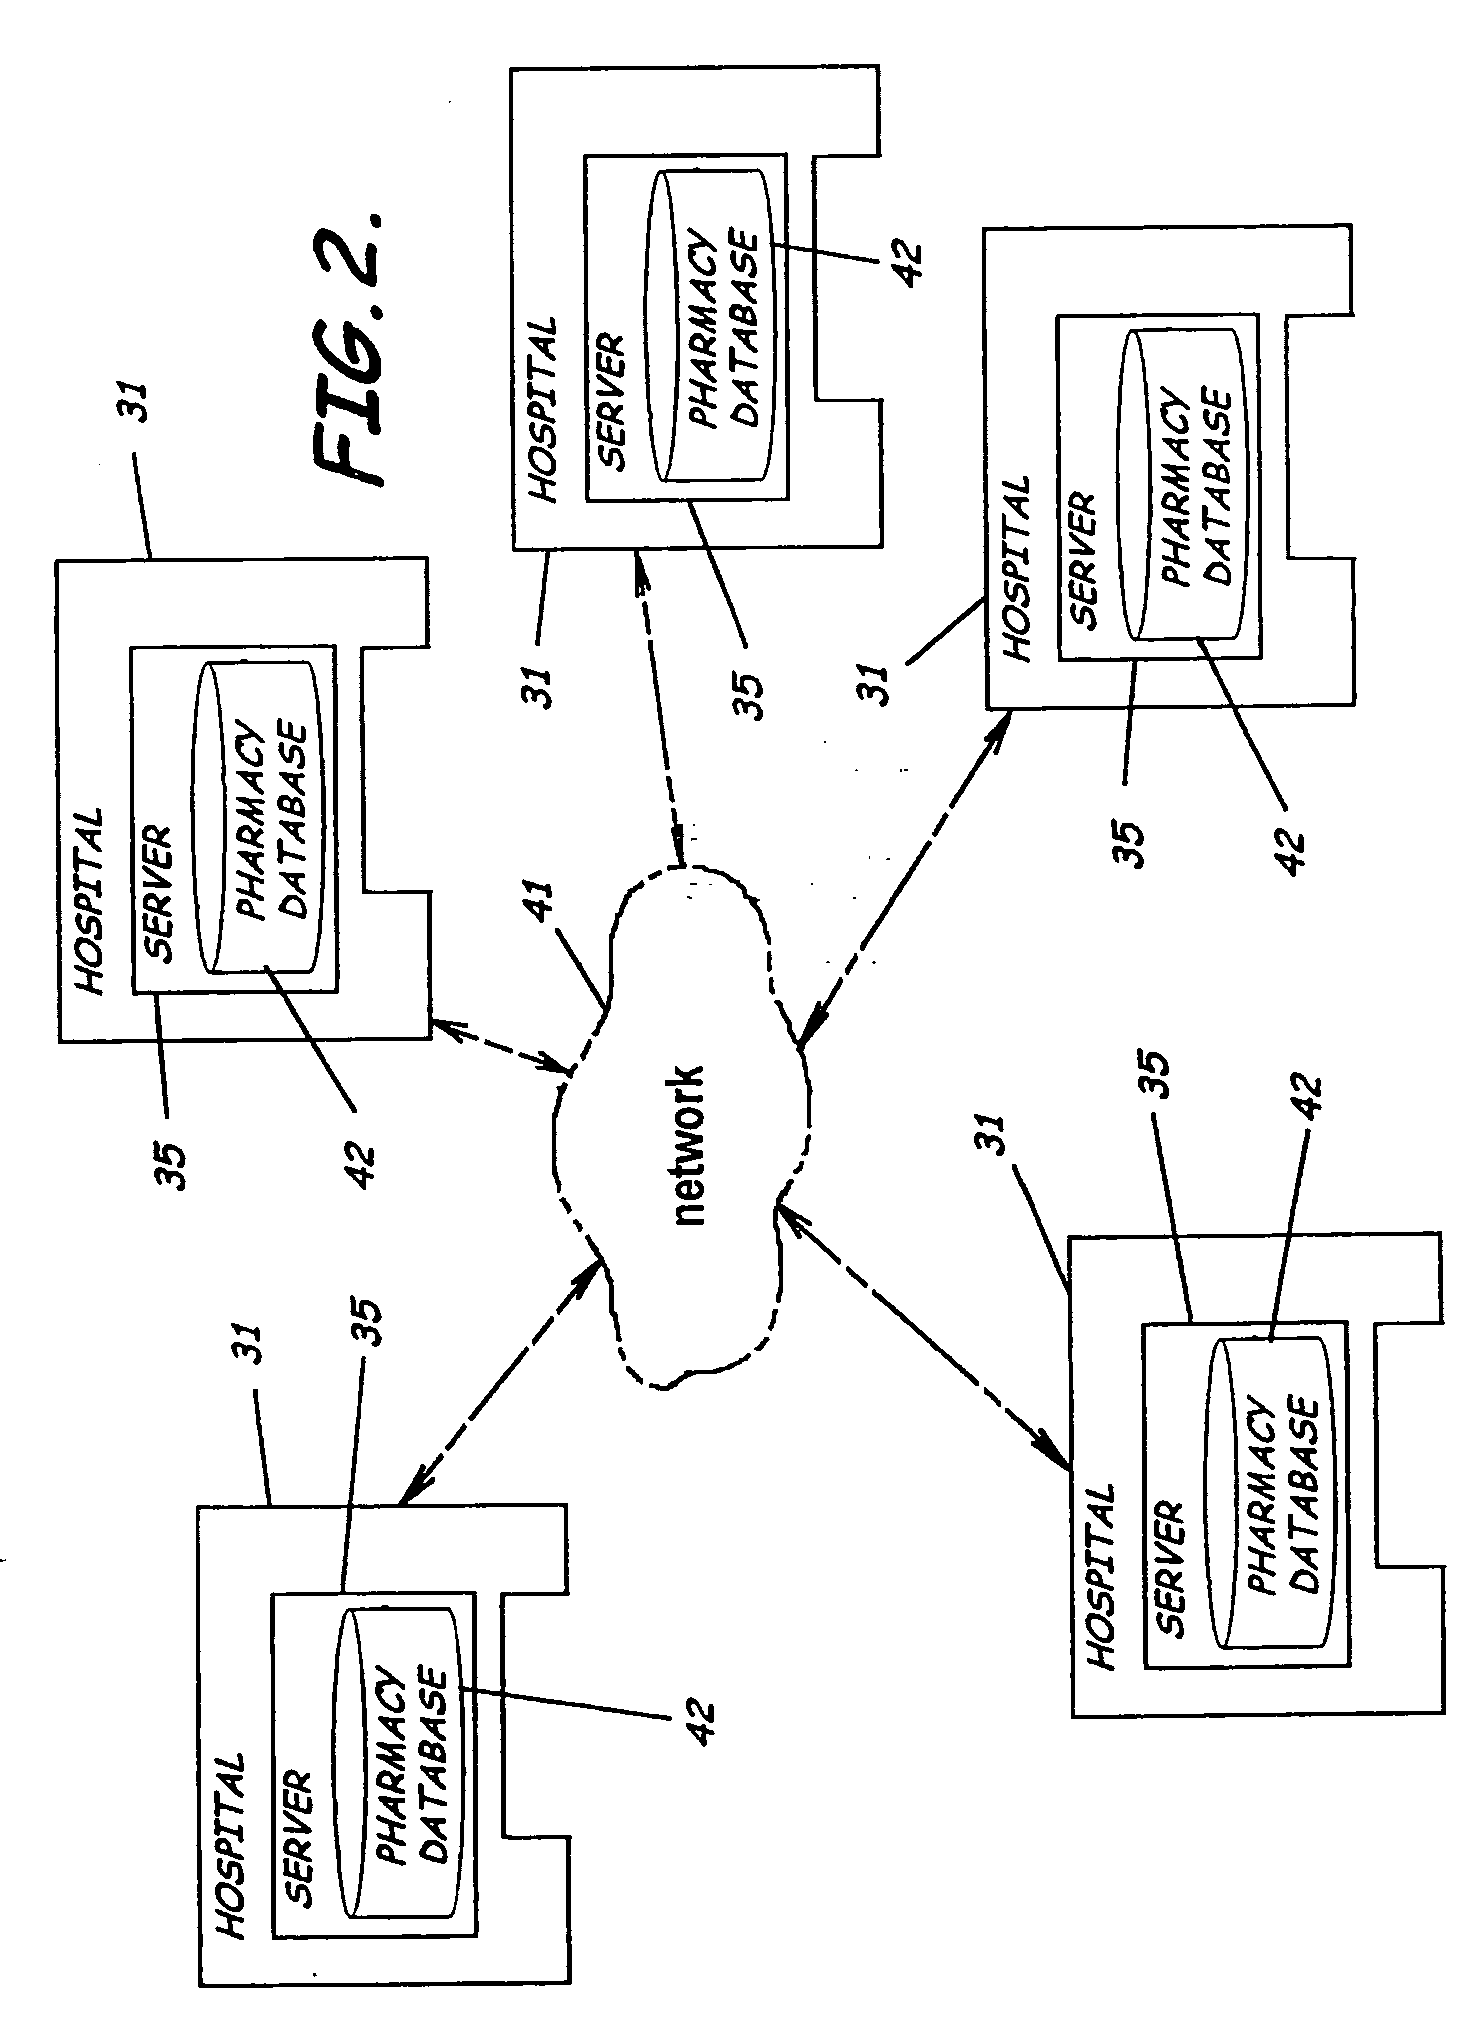 System and software of enhanced pharmacy services and related methods